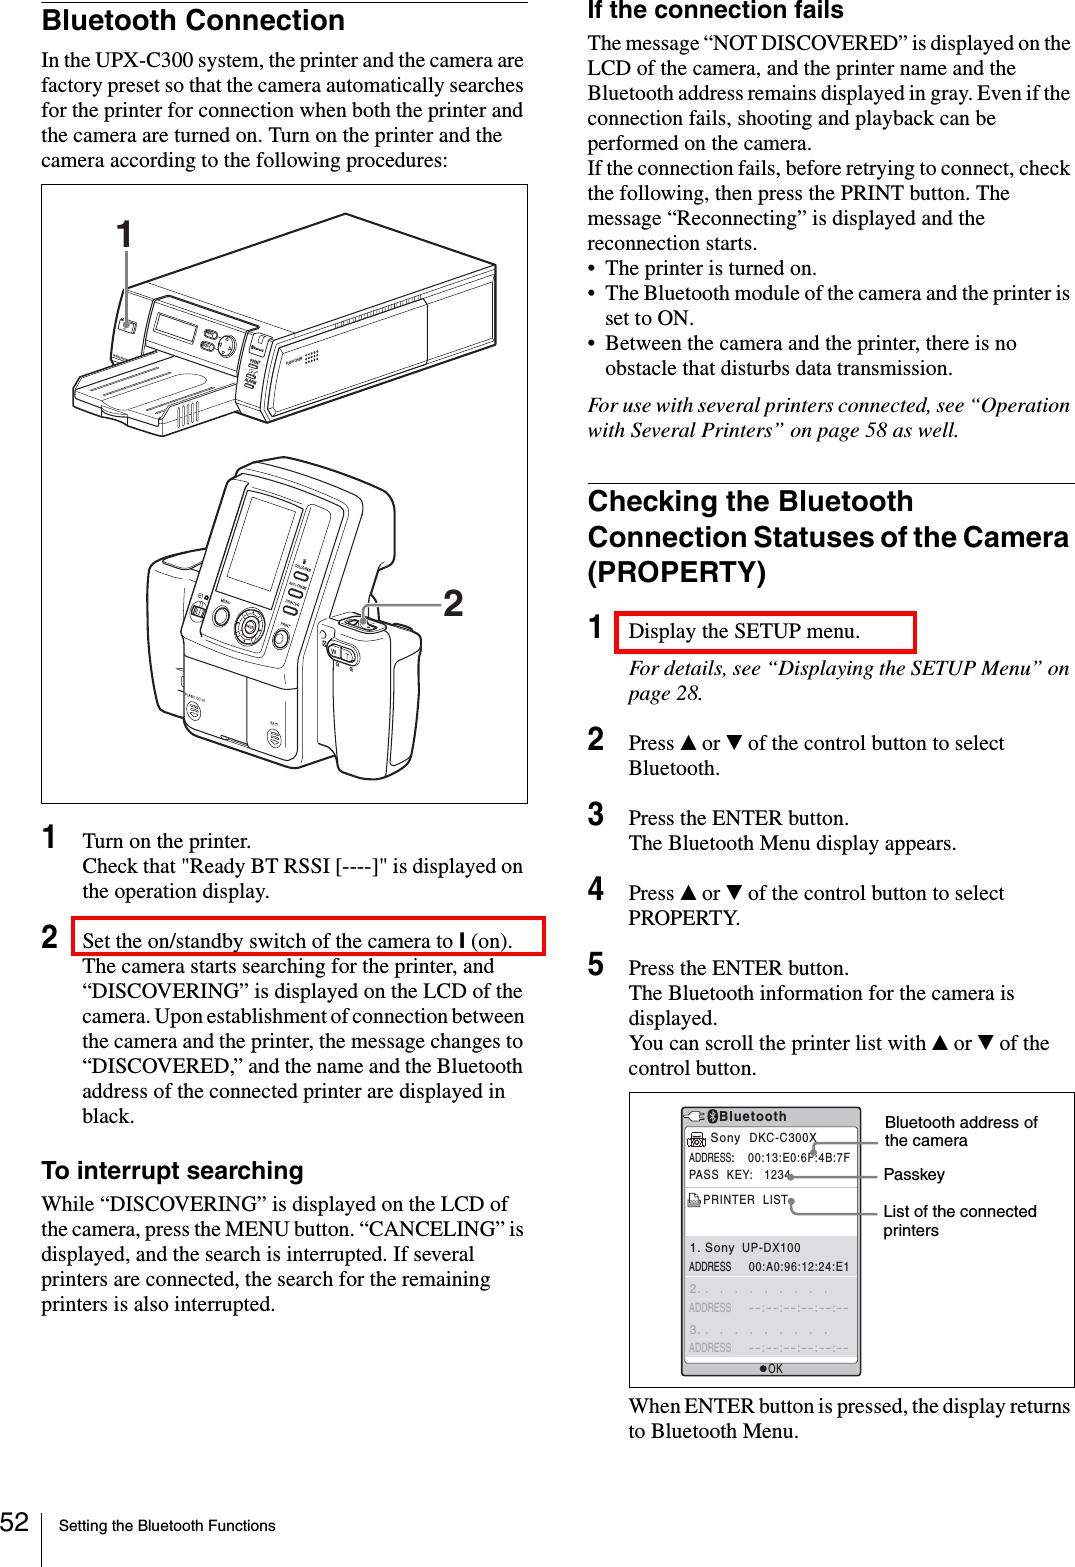 Setting the Bluetooth Functions52Bluetooth ConnectionIn the UPX-C300 system, the printer and the camera are factory preset so that the camera automatically searches for the printer for connection when both the printer and the camera are turned on. Turn on the printer and the camera according to the following procedures:1Turn on the printer.Check that &quot;Ready BT RSSI [----]&quot; is displayed on the operation display.2Set the on/standby switch of the camera to ? (on).The camera starts searching for the printer, and “DISCOVERING” is displayed on the LCD of the camera. Upon establishment of connection between the camera and the printer, the message changes to “DISCOVERED,” and the name and the Bluetooth address of the connected printer are displayed in black.To interrupt searchingWhile “DISCOVERING” is displayed on the LCD of the camera, press the MENU button. “CANCELING” is displayed, and the search is interrupted. If several printers are connected, the search for the remaining printers is also interrupted.If the connection failsThe message “NOT DISCOVERED” is displayed on the LCD of the camera, and the printer name and the Bluetooth address remains displayed in gray. Even if the connection fails, shooting and playback can be performed on the camera.If the connection fails, before retrying to connect, check the following, then press the PRINT button. The message “Reconnecting” is displayed and the reconnection starts.• The printer is turned on.• The Bluetooth module of the camera and the printer is set to ON.• Between the camera and the printer, there is no obstacle that disturbs data transmission.For use with several printers connected, see “Operation with Several Printers” on page 58 as well.Checking the Bluetooth Connection Statuses of the Camera (PROPERTY)1Display the SETUP menu.For details, see “Displaying the SETUP Menu” on page 28.2Press v or V of the control button to select Bluetooth.3Press the ENTER button.The Bluetooth Menu display appears.4Press v or V of the control button to select PROPERTY.5Press the ENTER button.The Bluetooth information for the camera is displayed.You can scroll the printer list with v or V of the control button.When ENTER button is pressed, the display returns to Bluetooth Menu.PUSH OPENPRINTEXECMENUALARMDIGITAL PHOTO PRINTER21OKBluetoothSony  DKC-C300XADDRESS:    00:13:E0:6F:4B:7FPASS  KEY:   1234PRINTER  LISTADDRESS     00:A0:96:12:24:E1ADDRESS     --:--:--:--:--:--1. Sony  UP-DX1002. .   .   .   .   .   .   .   .   .ADDRESS     --:--:--:--:--:--3. .   .   .   .   .   .   .   .   .Bluetooth address of the cameraPasskeyList of the connected printers